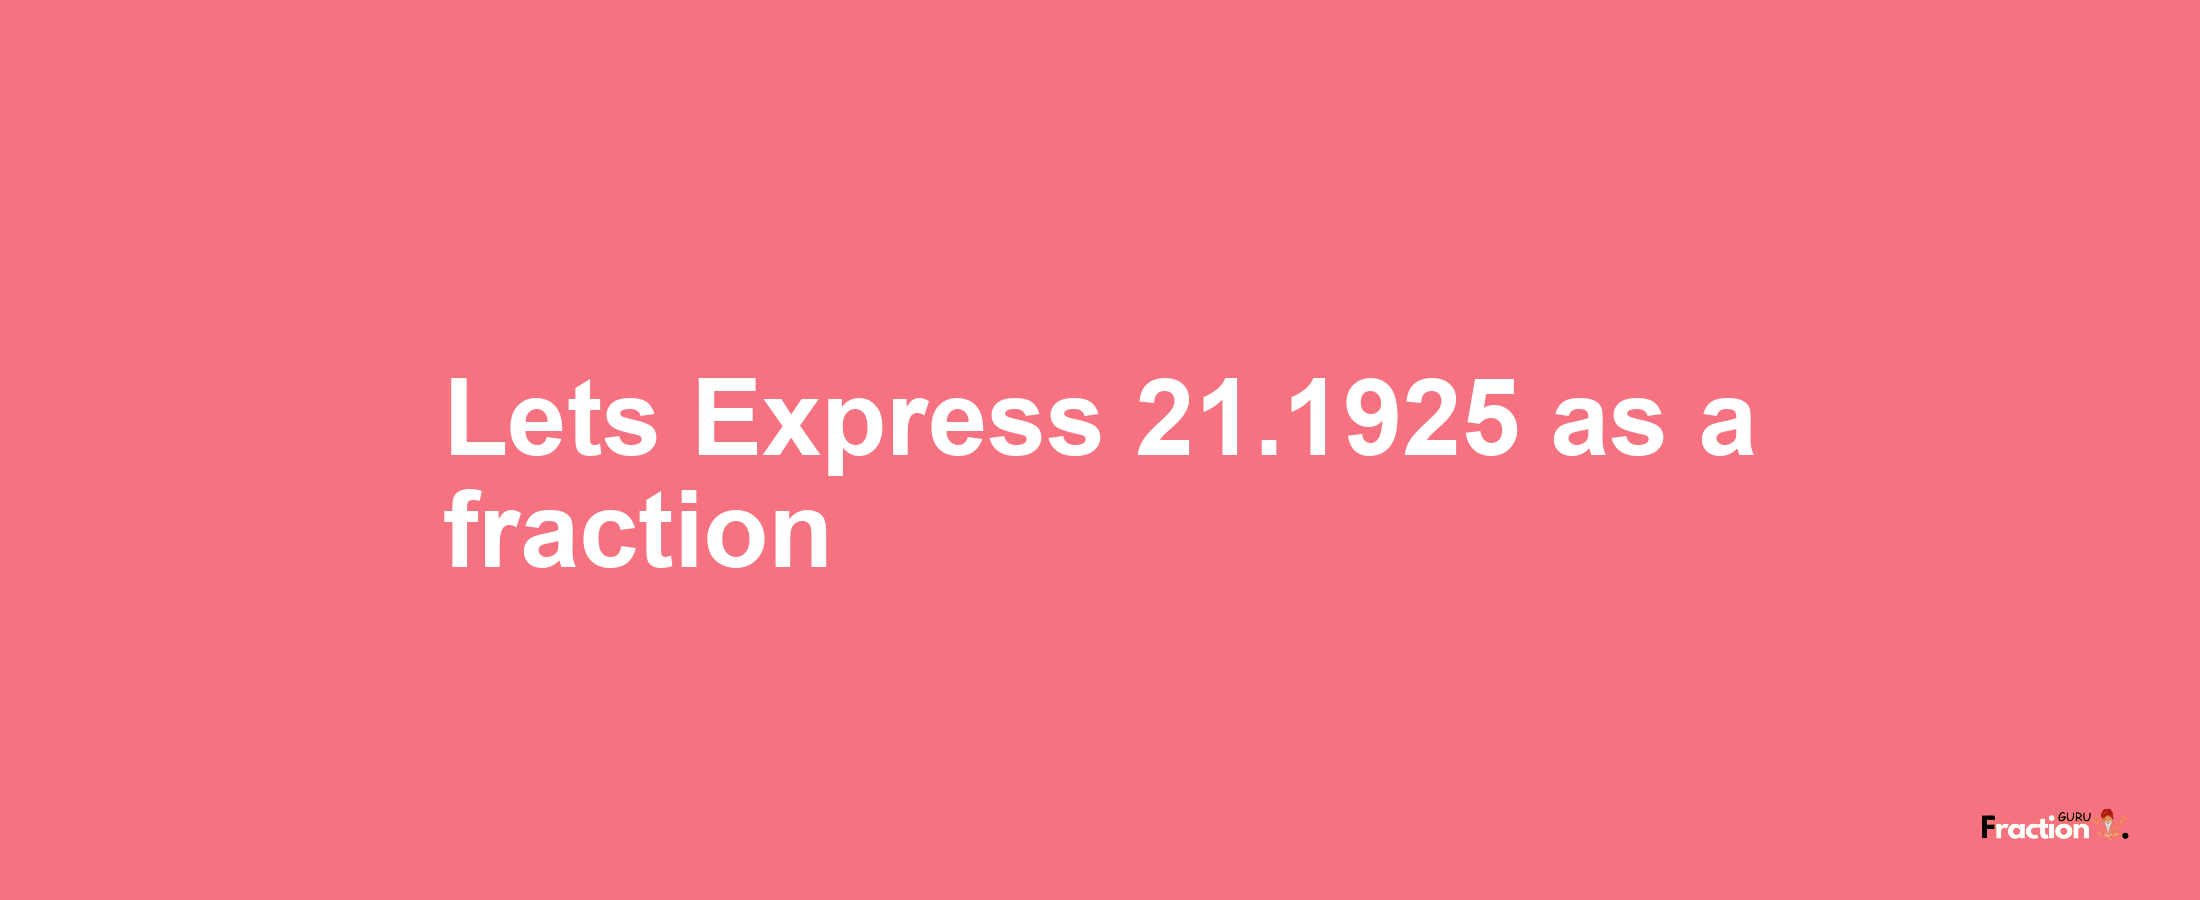 Lets Express 21.1925 as afraction